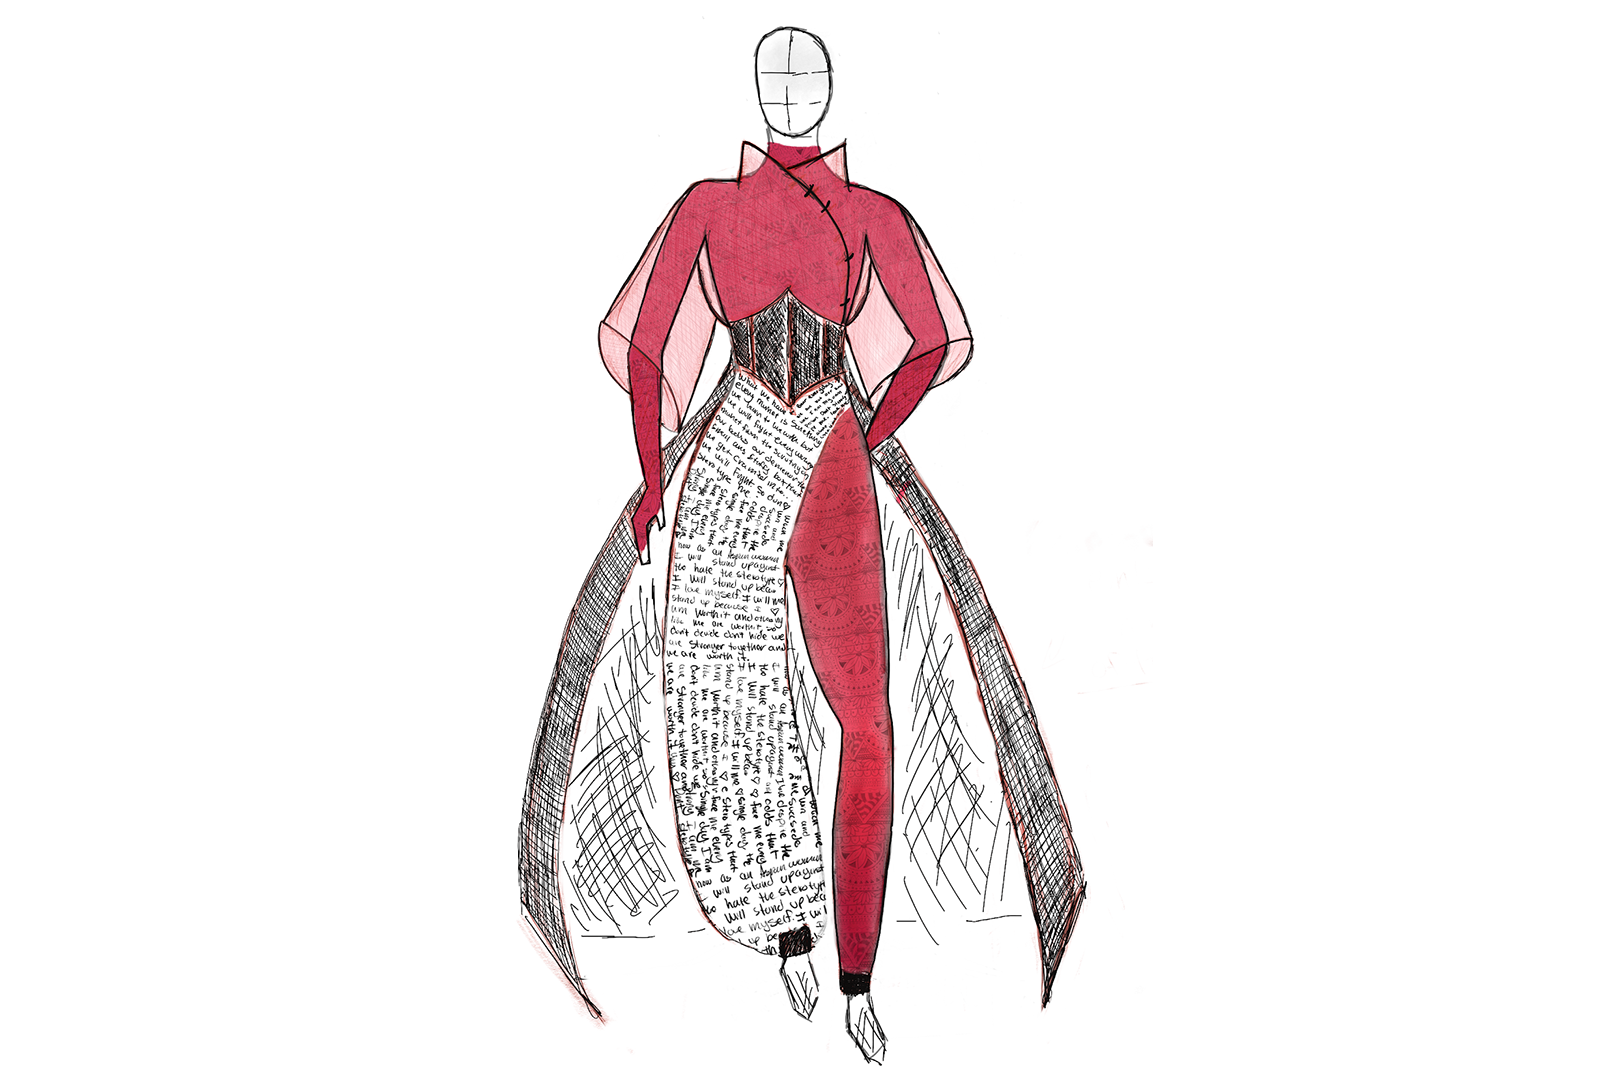 A design for a dress challenging stereotypes of Asian women, created by student Ella Yip.